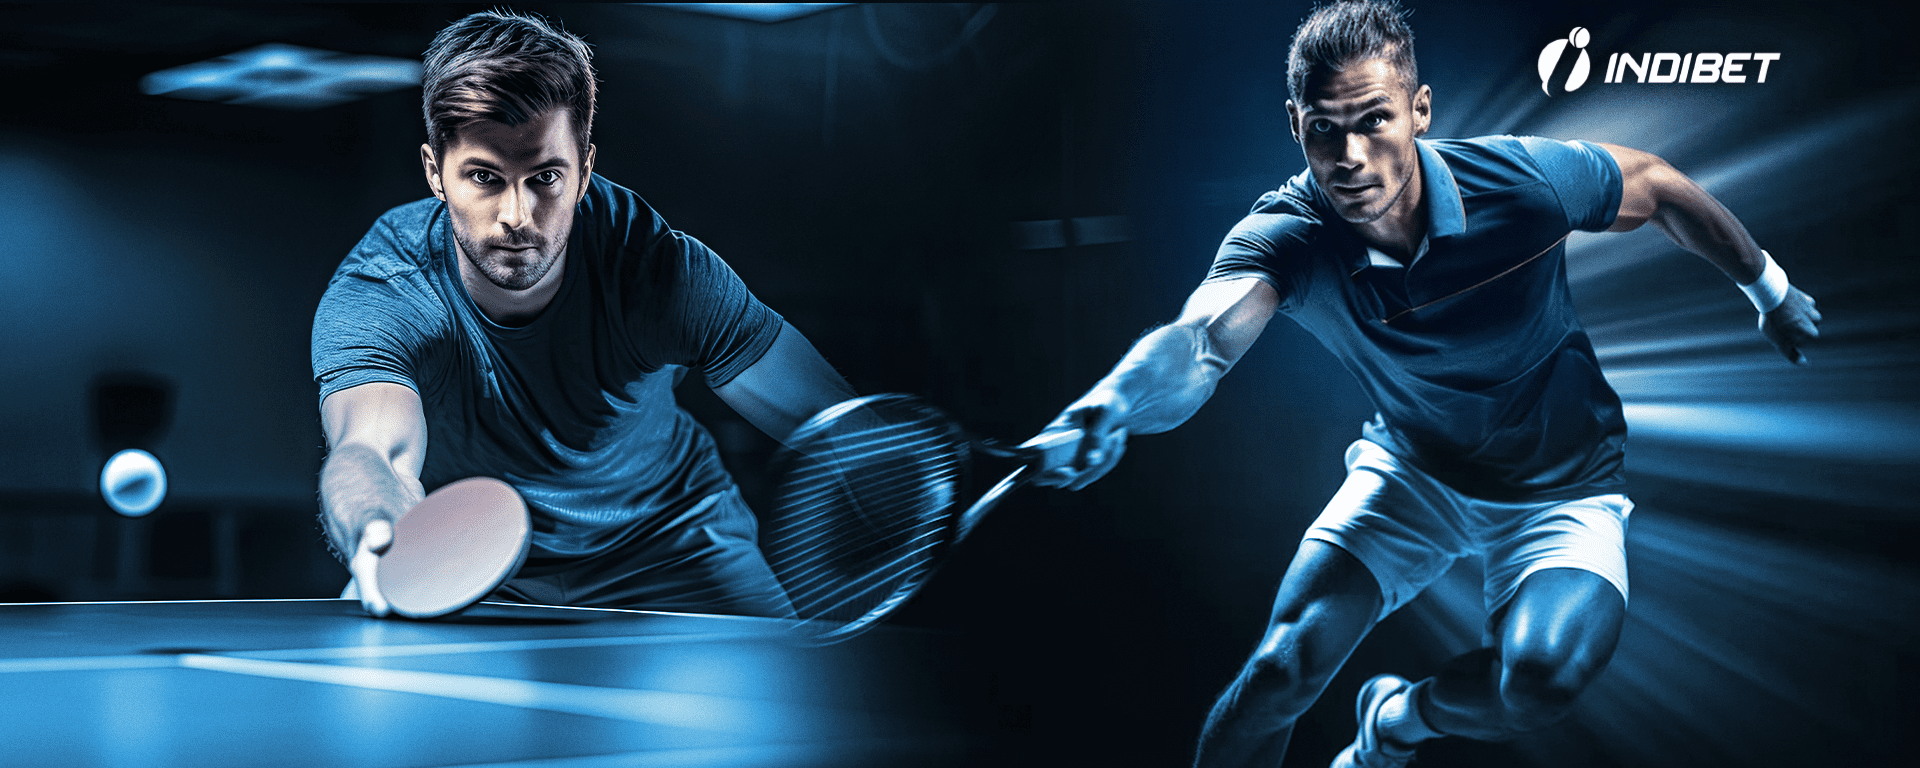 TABLE TENNIS AND TENNIS BETTING ON INDIBET